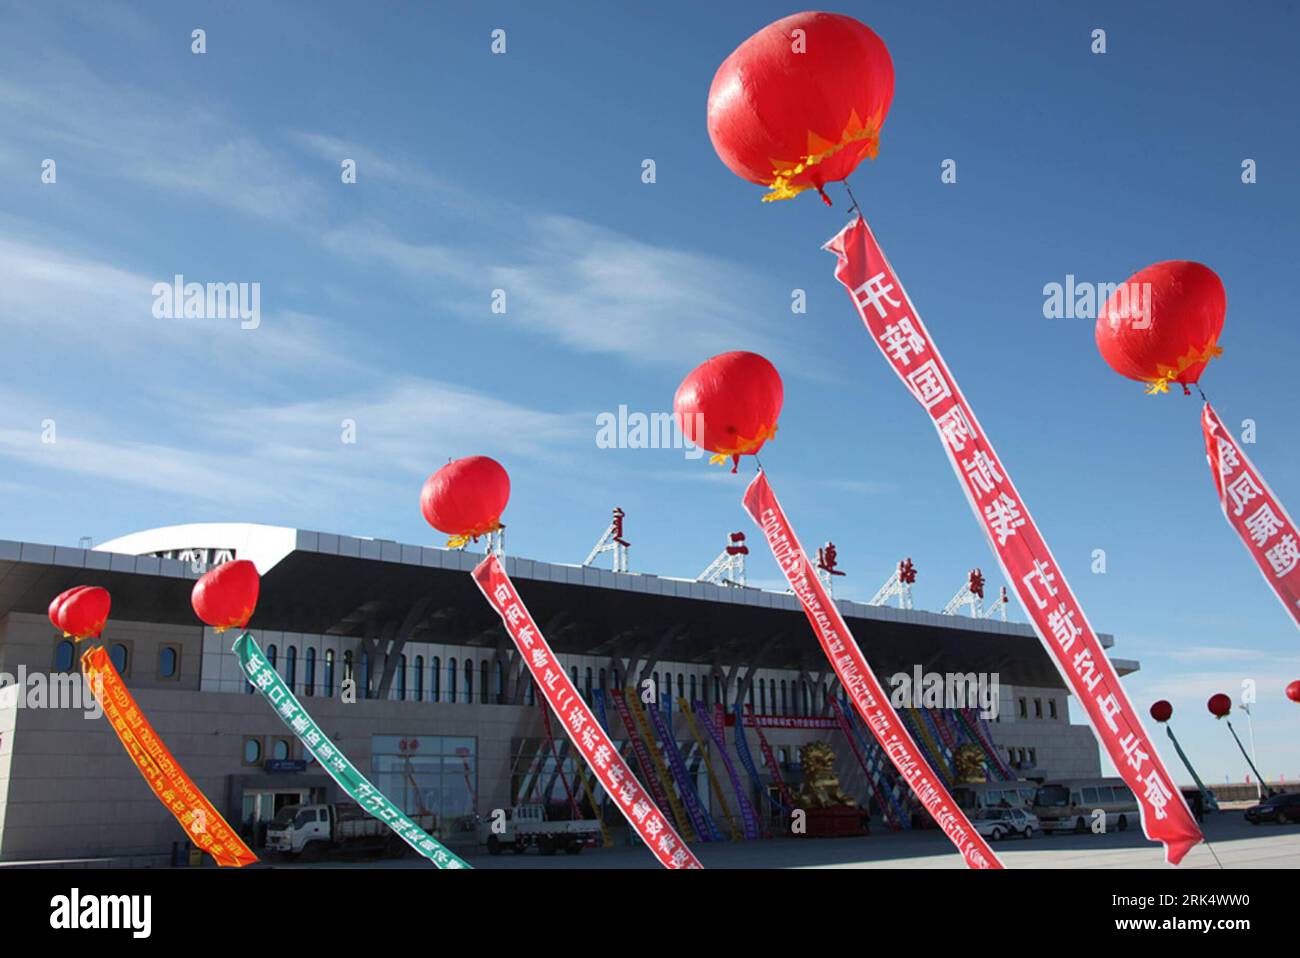 Bildnummer: 53675320  Datum: 16.12.2009  Copyright: imago/Xinhua (091217) -- ERENHOT, Dec. 17, 2009 (Xinhua) -- Balloons fly over a new airport, a 257 million yuan (37.79 million USD) project 32 kilometers away from the China-Mongolia border, in Erenhot, north China s Inner Mongolia Automonous Region, Dec. 16, 2009. The navigation system and runway of the new airport in Erenhot were successfully tested Wednesday, and authorities announced the airport is to open next month. (Xinhua/Li Yunping) (yy) (2)CHINA-INNER MONGOLIA-ERENHOT-AIRPORT-TEST (CN) PUBLICATIONxNOTxINxCHN China Transport Logistik Stock Photo